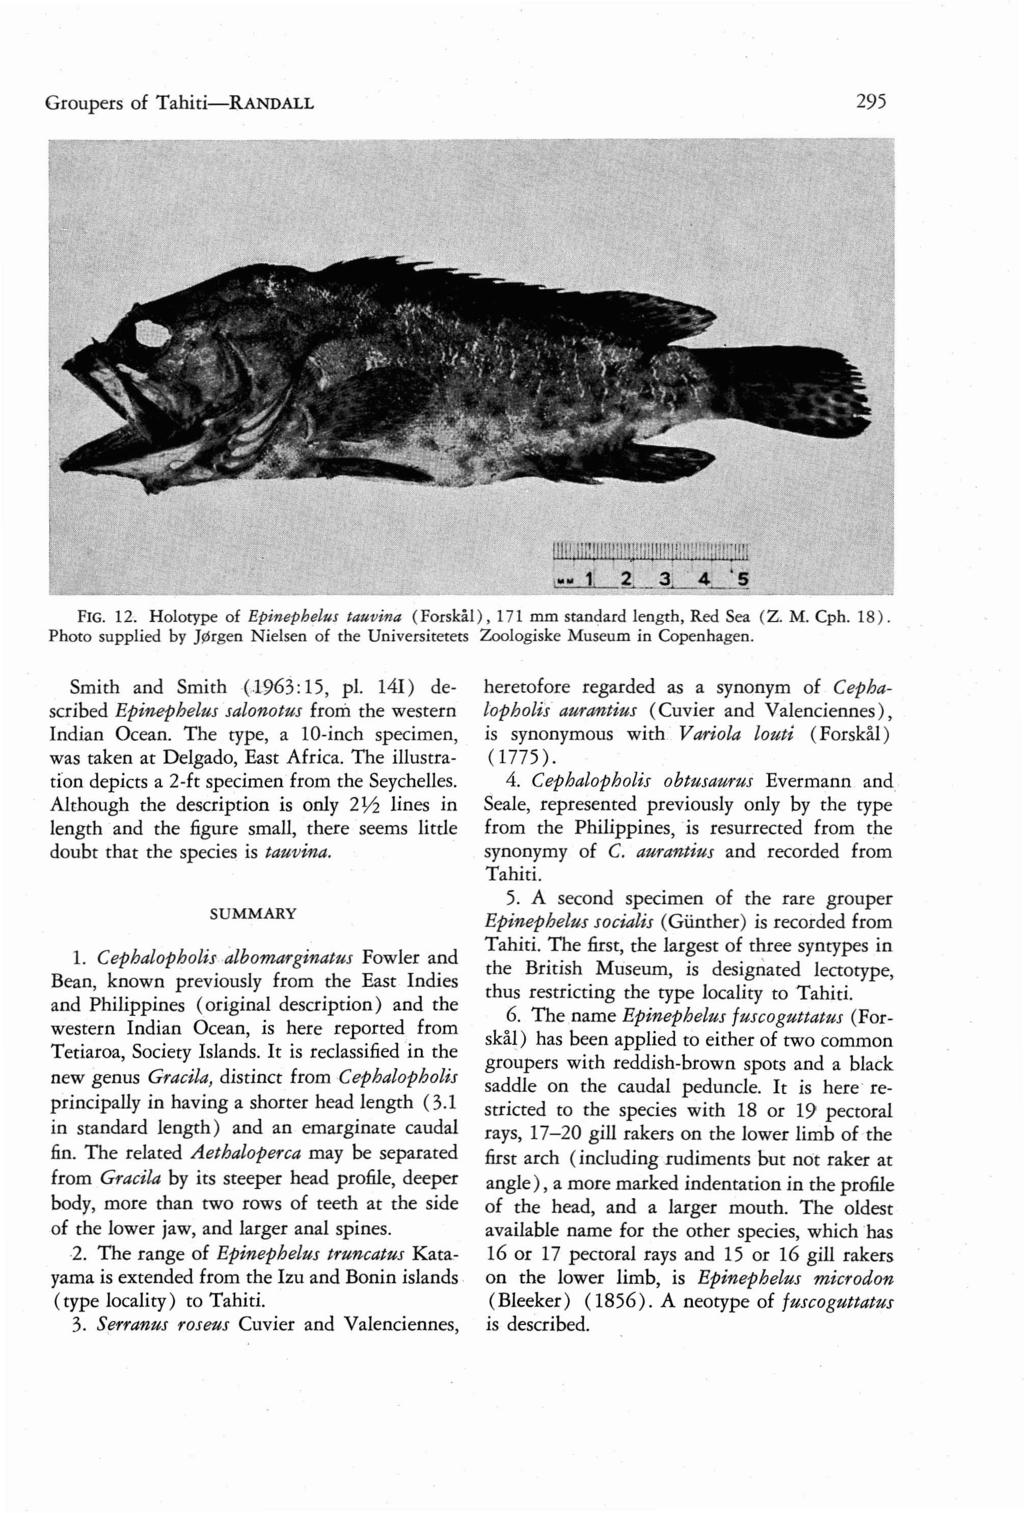 Groupers of Tahiti-RANDALL 295 FIG. 12. Holorype of Epinephelus tauvina (Forskal ), 171 mm standard length, Red Sea (Z. M. Cph. 18 ).